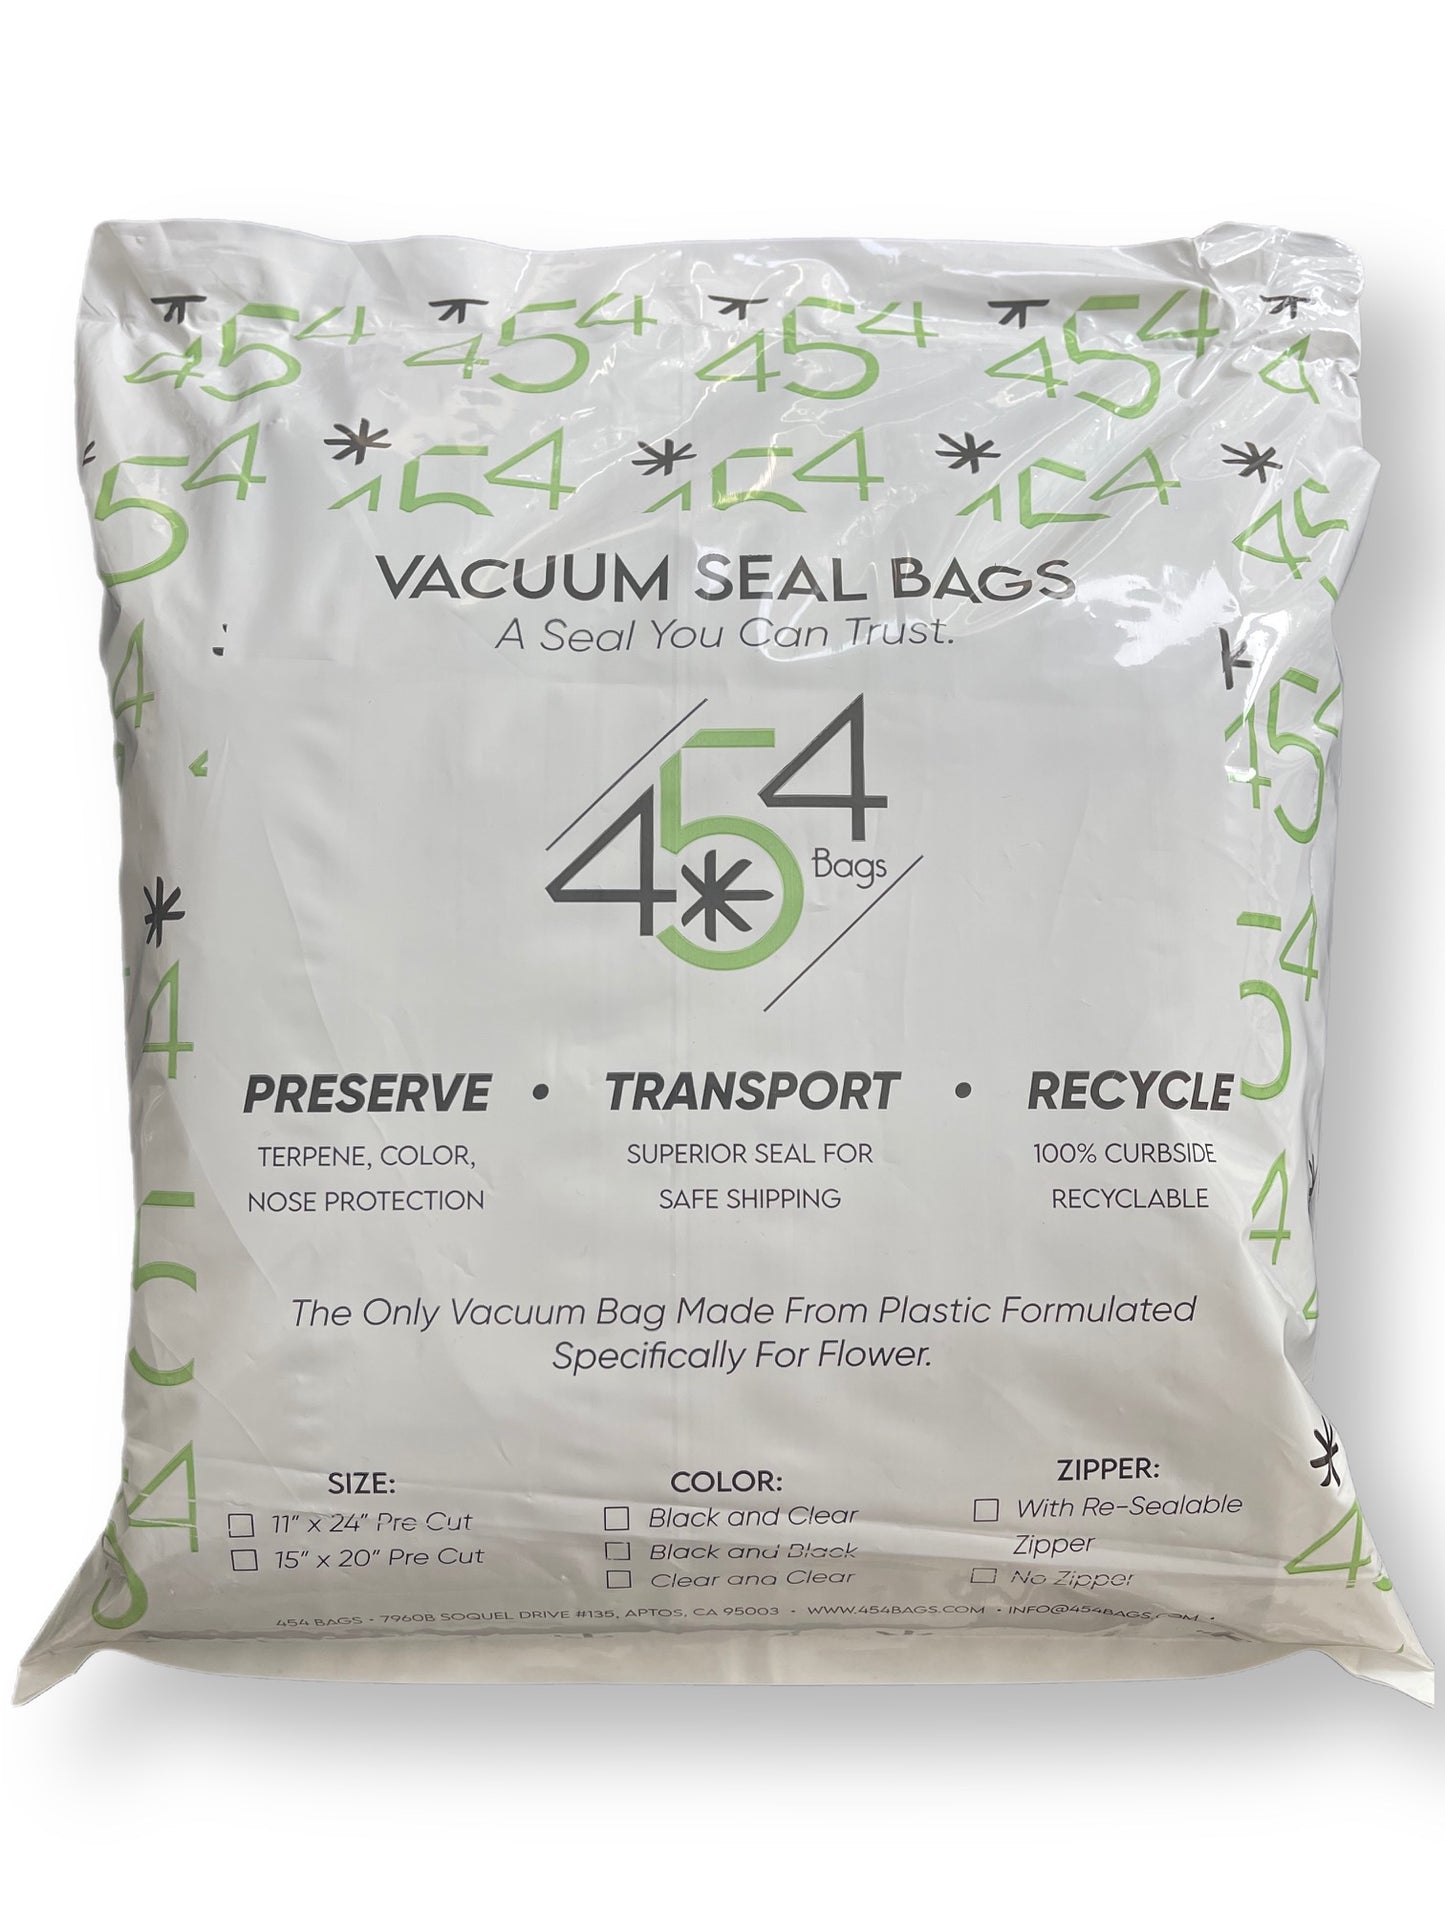 Packaging for the 454 Vacuum Bags, emphasizing the unique, proprietary plastic blend designed specifically for cannabis. Highlights its attributes like stronger seal, high oxygen barrier, and extended terpene life.